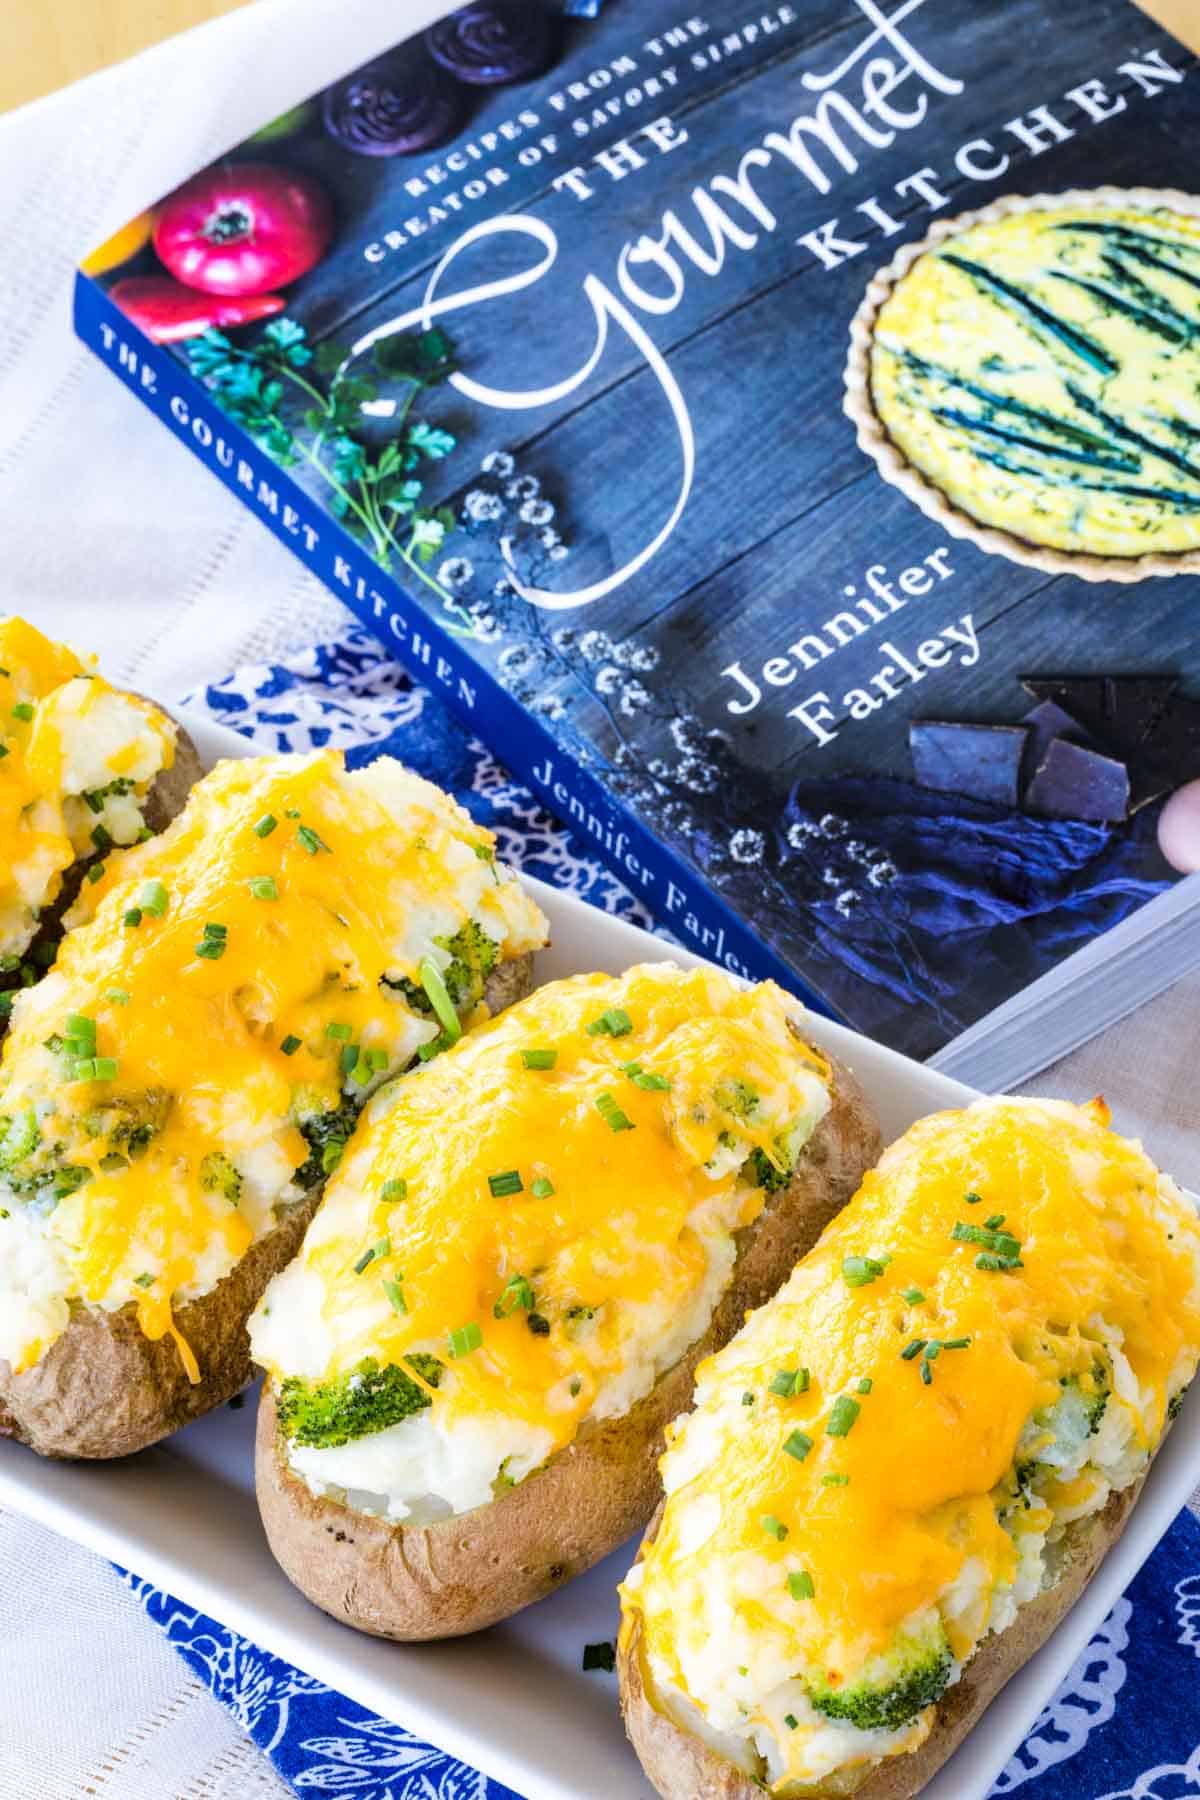 Broccoli cheddar baked potatoes on a plate next to The Gourmet Kitchen cookbook.